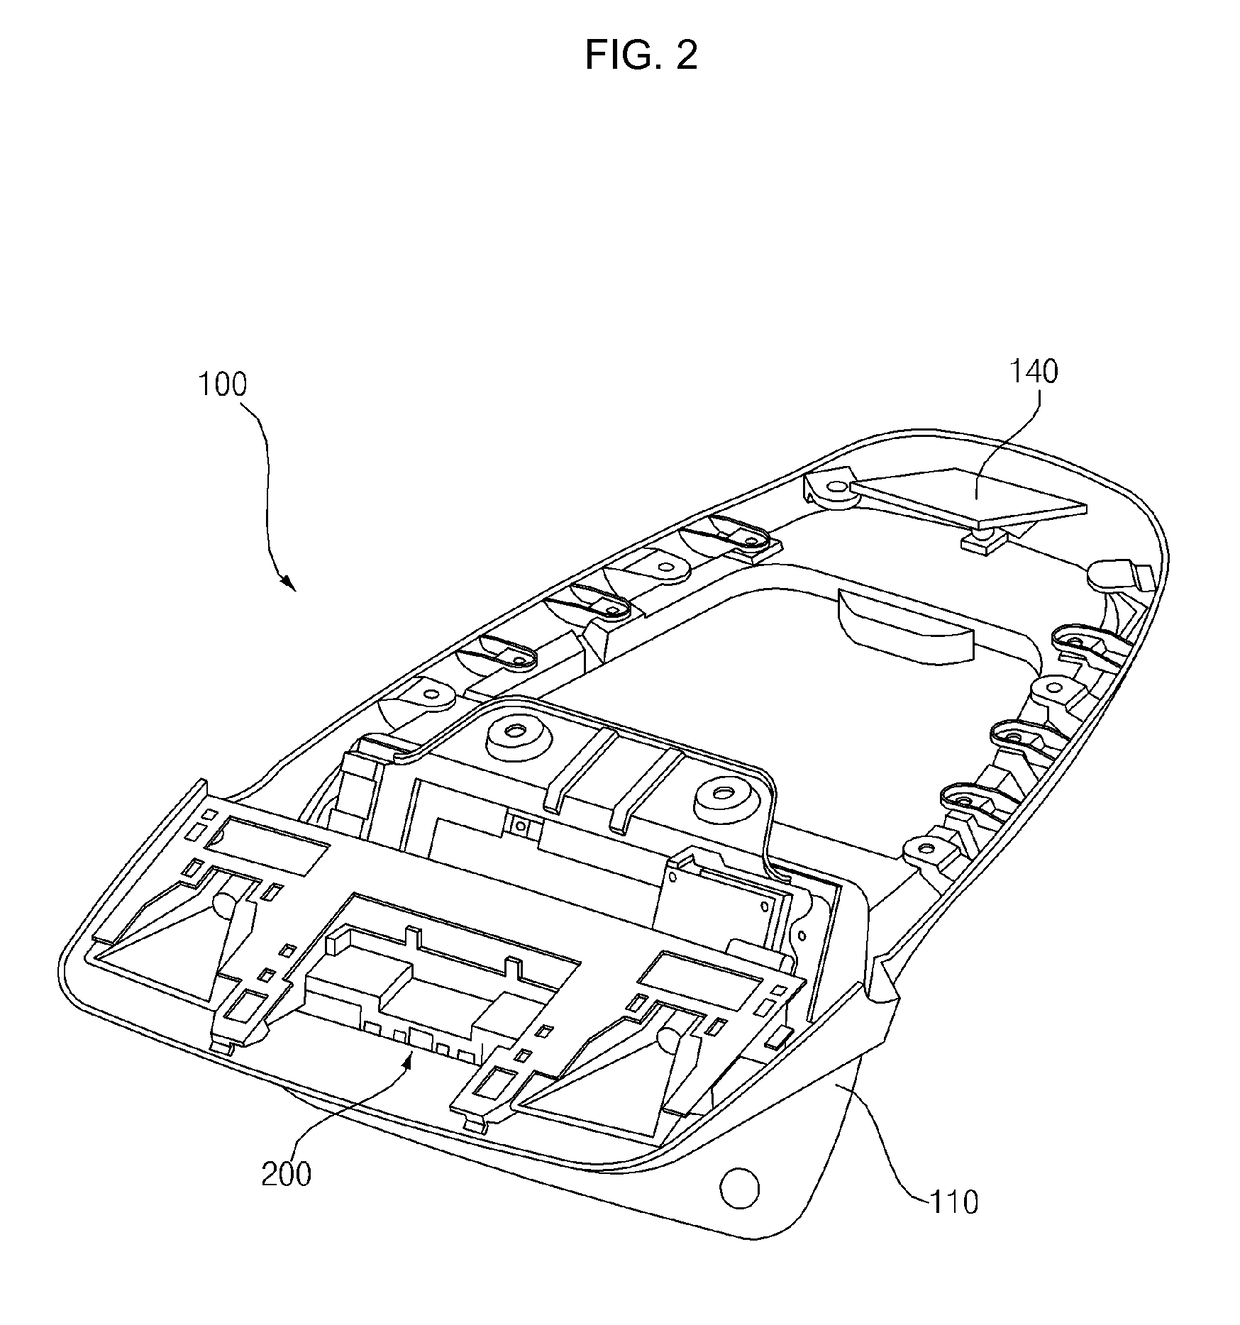 Integrated overhead console assembly for vehicle